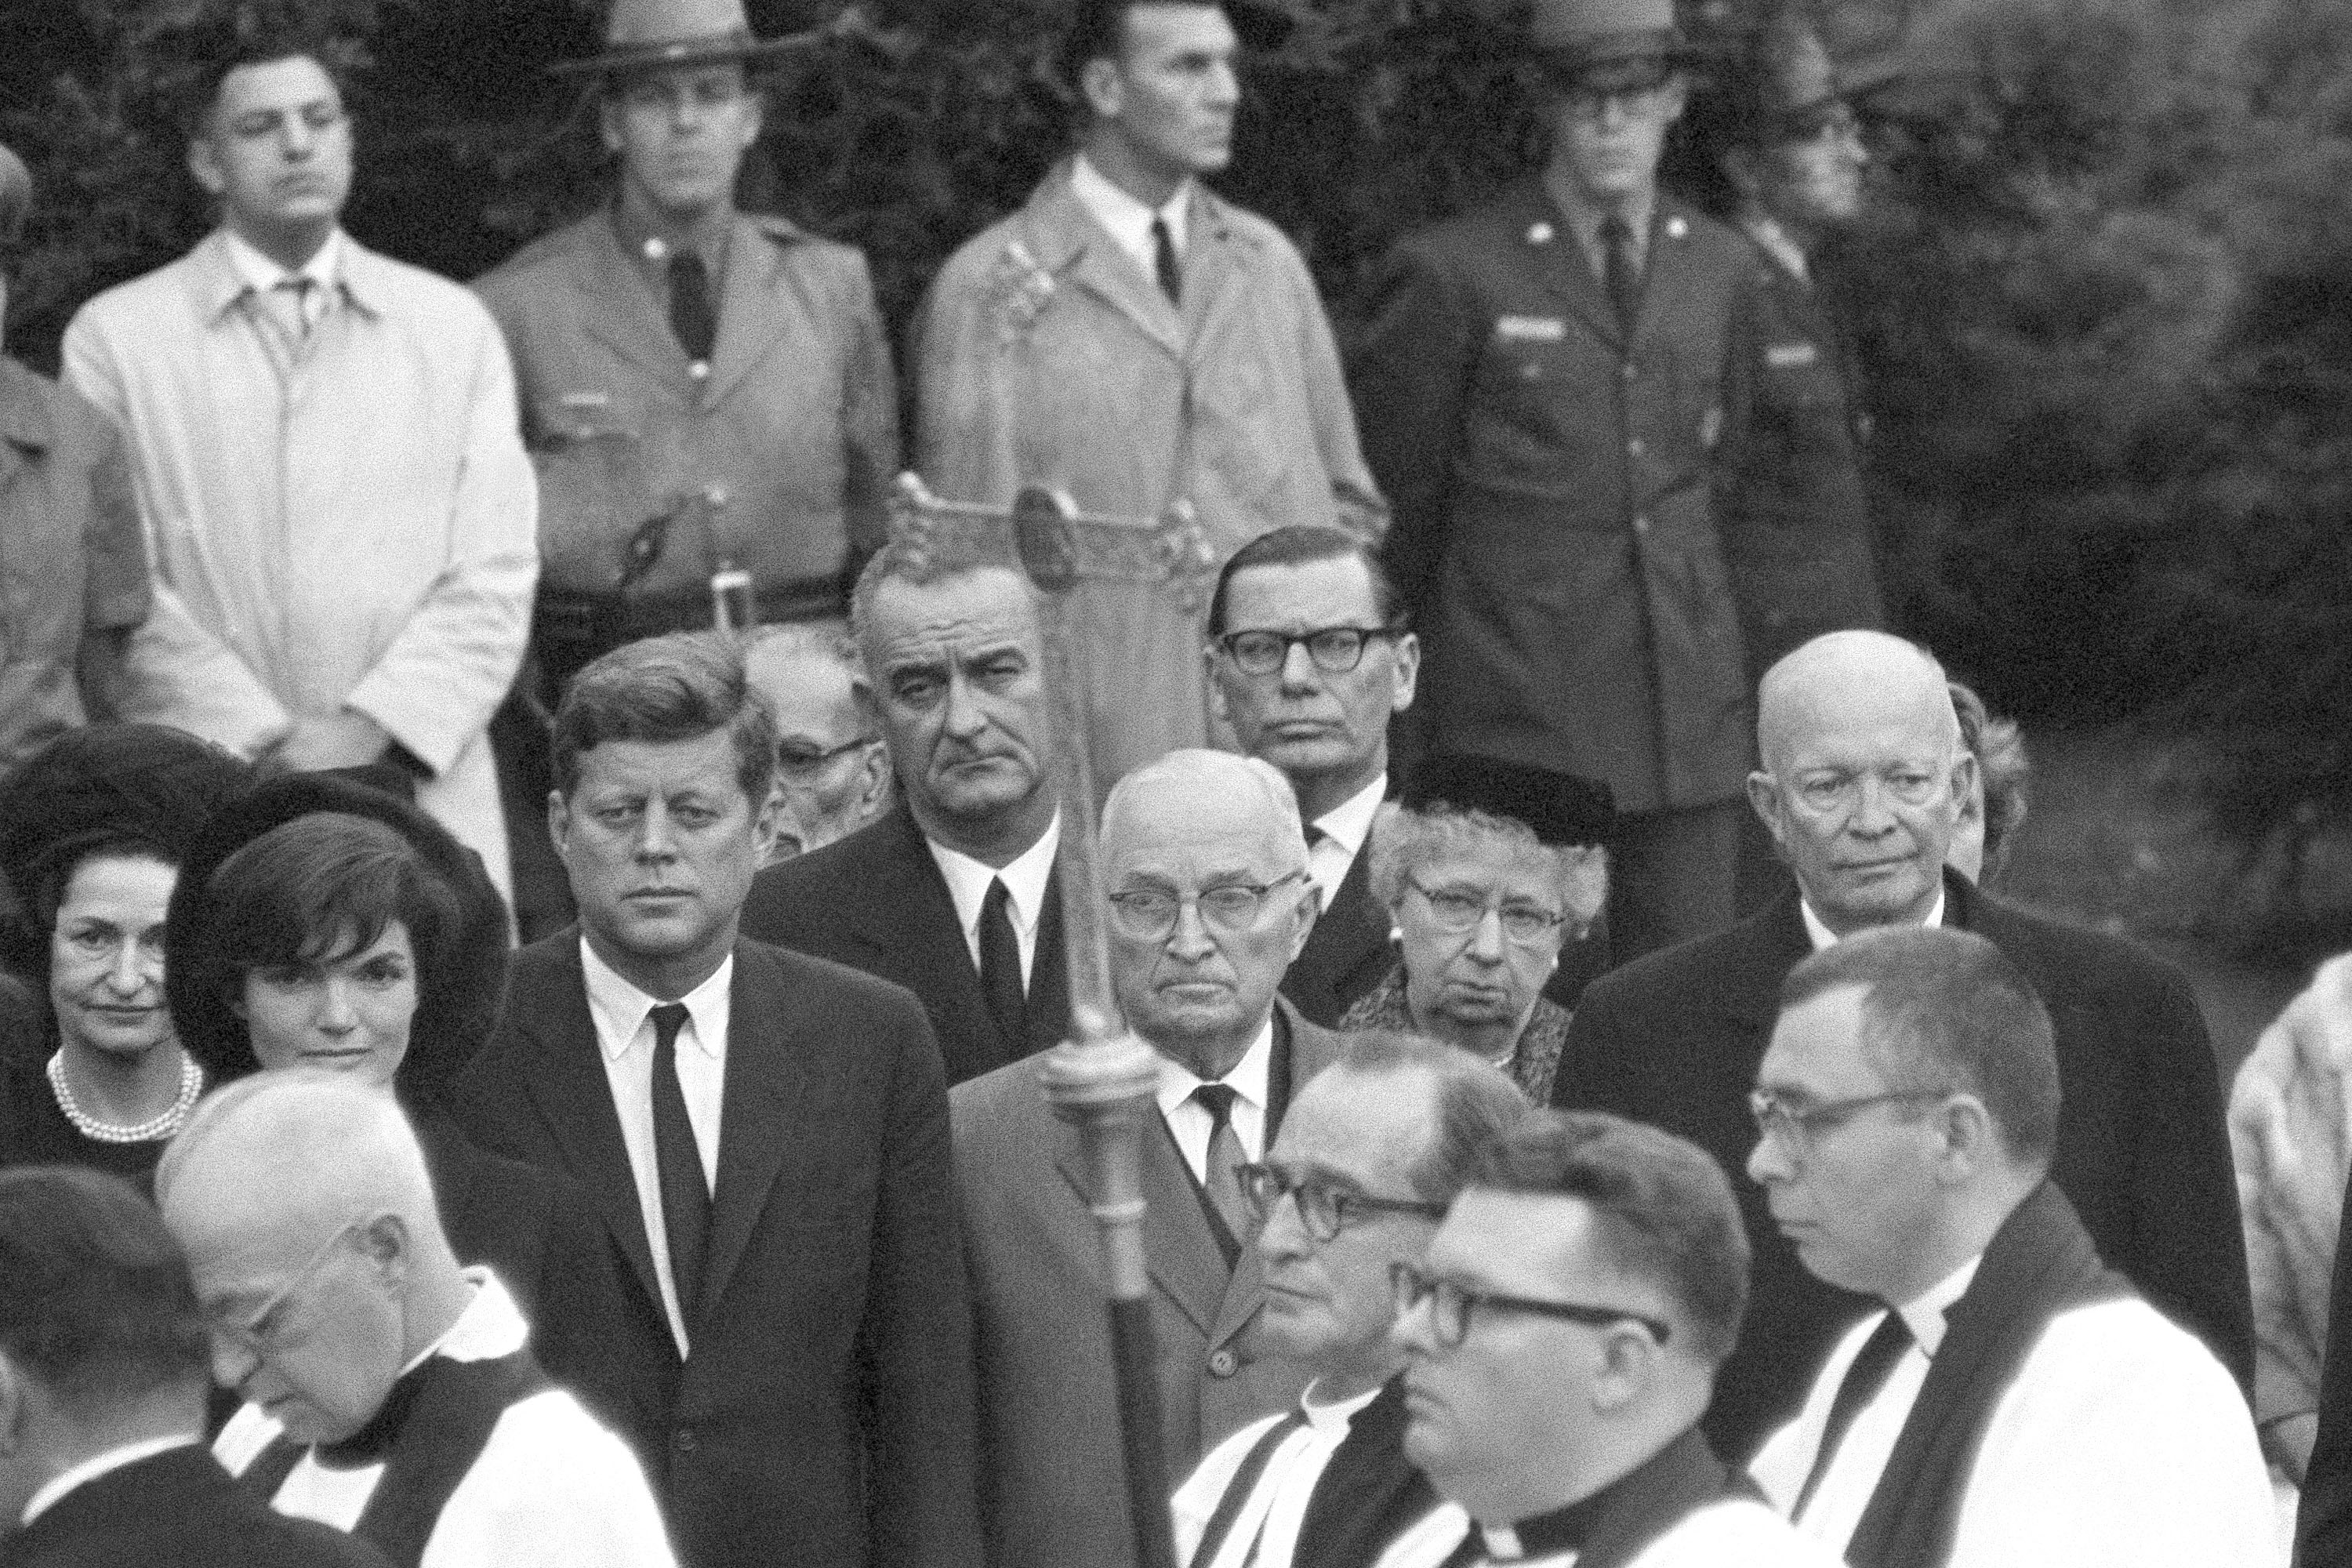 President John F. Kennedy is joined by two former Presidents during services at grave of Mrs. Eleanor Roosevelt in rose garden of the Roosevelt estate at Hyde Park, New York  Nov. 10, 1962. Left to right are: Mrs.Jacqueline , President John Kennedy, Vice President Lyndon Johnson, former President Harry Truman and Mrs. Truman, and former President Dwight Eisenhower. (AP Photo)